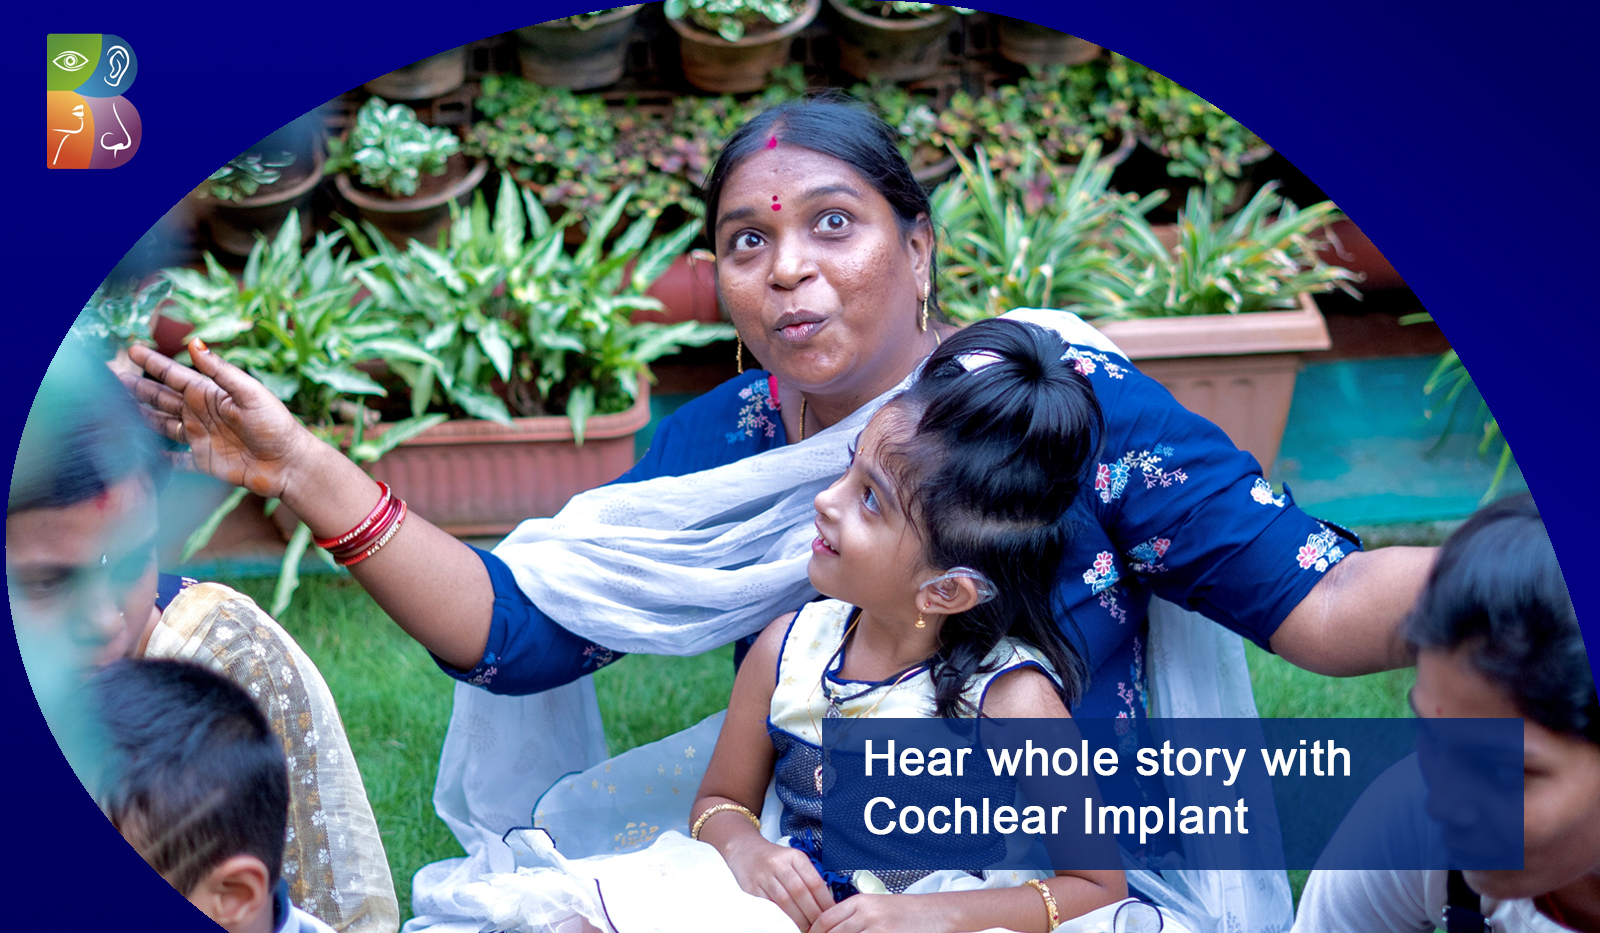 Hear whole story with Cochlear Implant